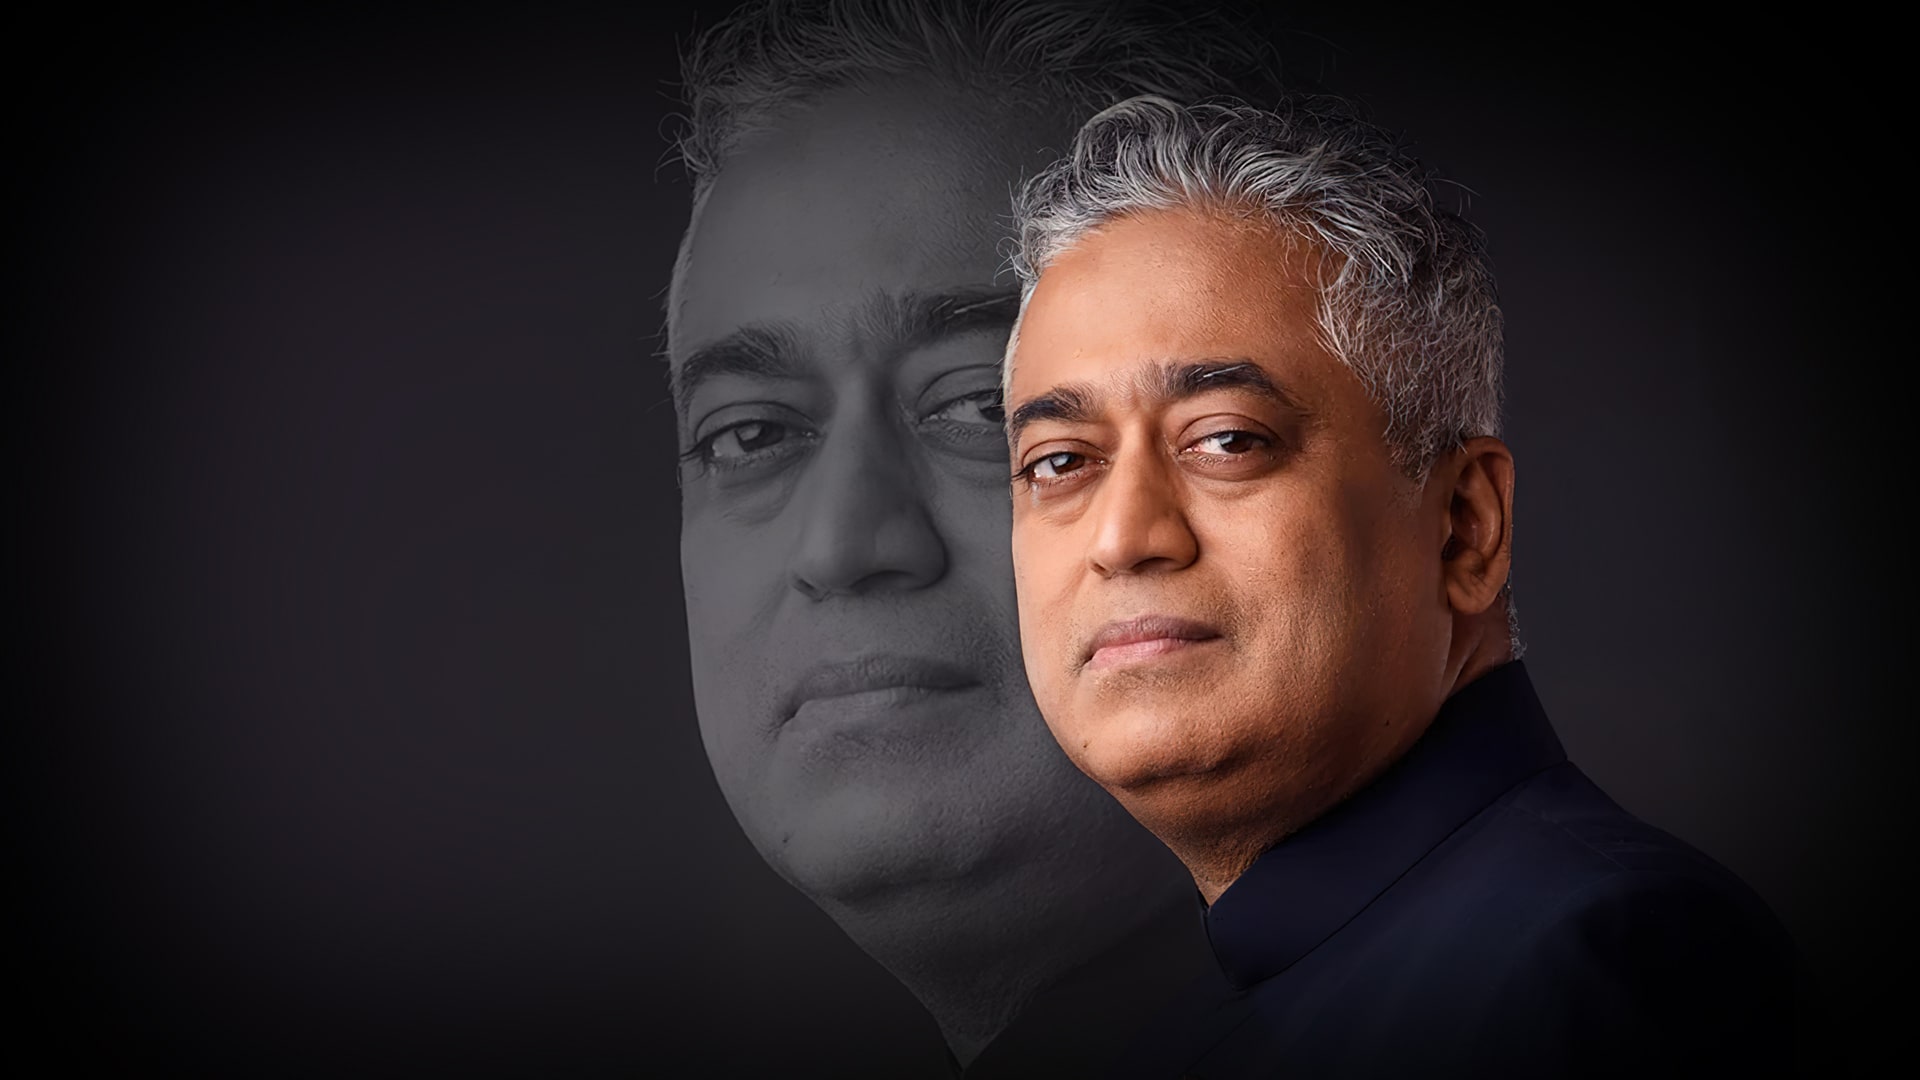 Media is trying to divide people rather than uniting them says Rajdeep Sardesai